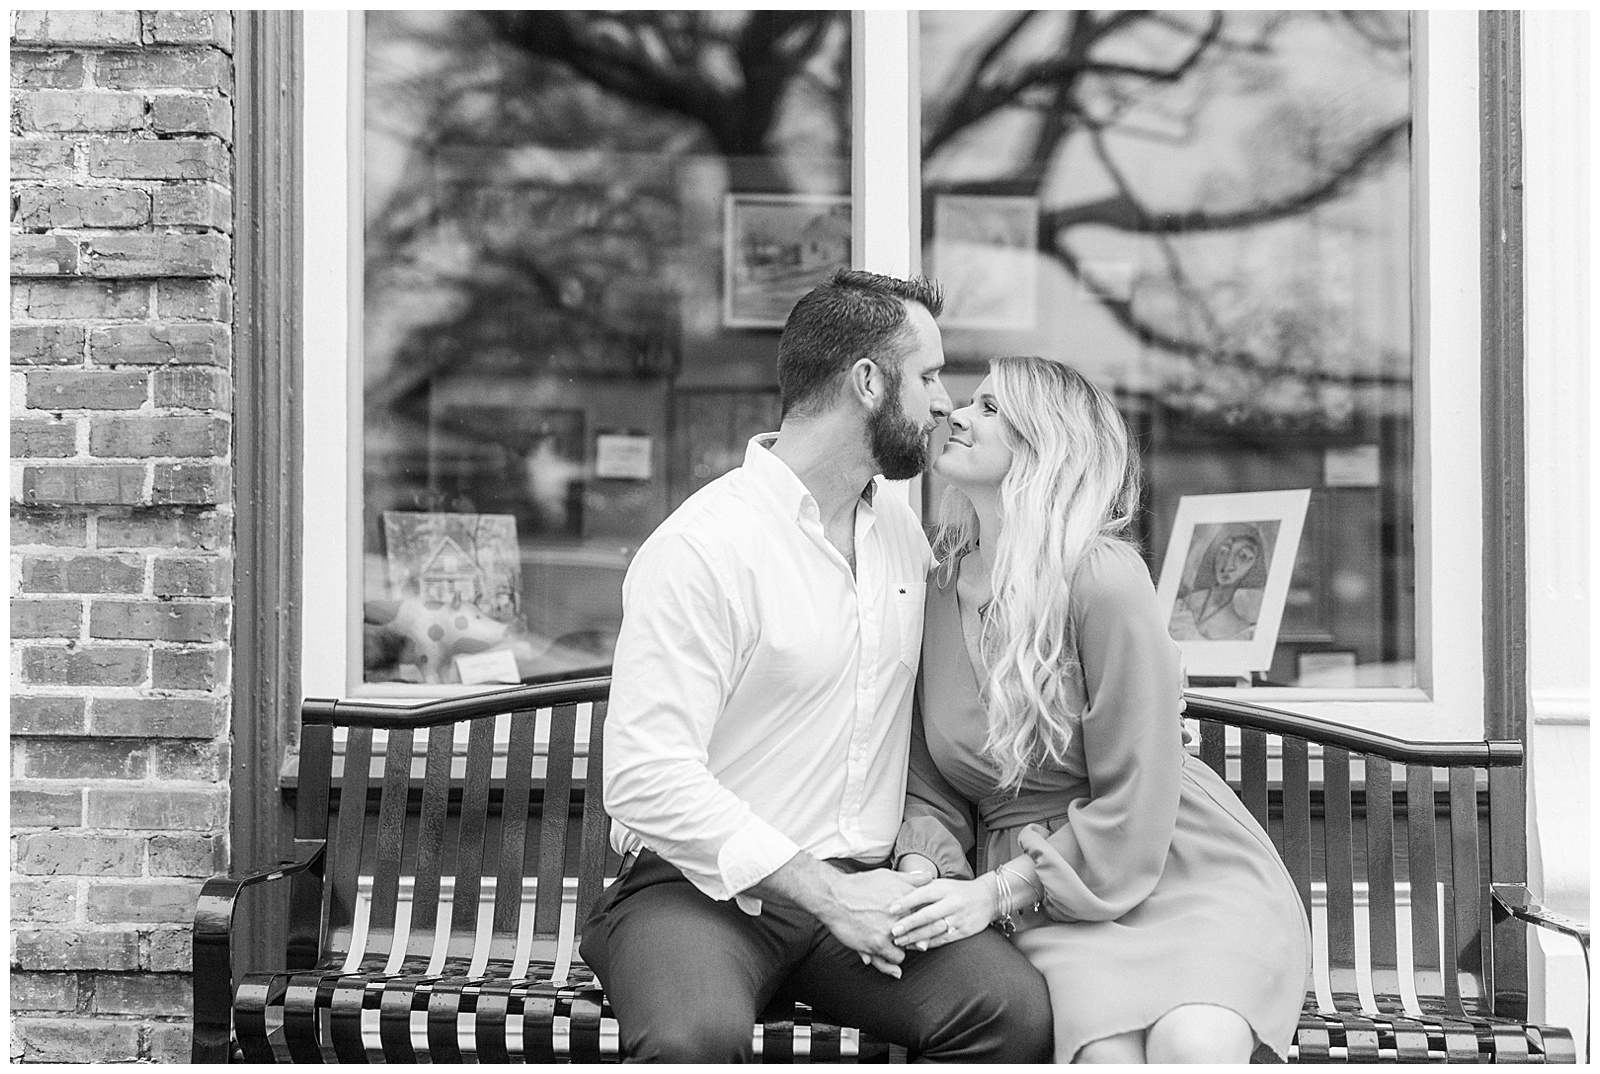 Adorable couple kissing on main street bench in front of downtown shop window in Waxhaw, NC Engagement Session with Bright Hot Pink Dress Outfit Ideas